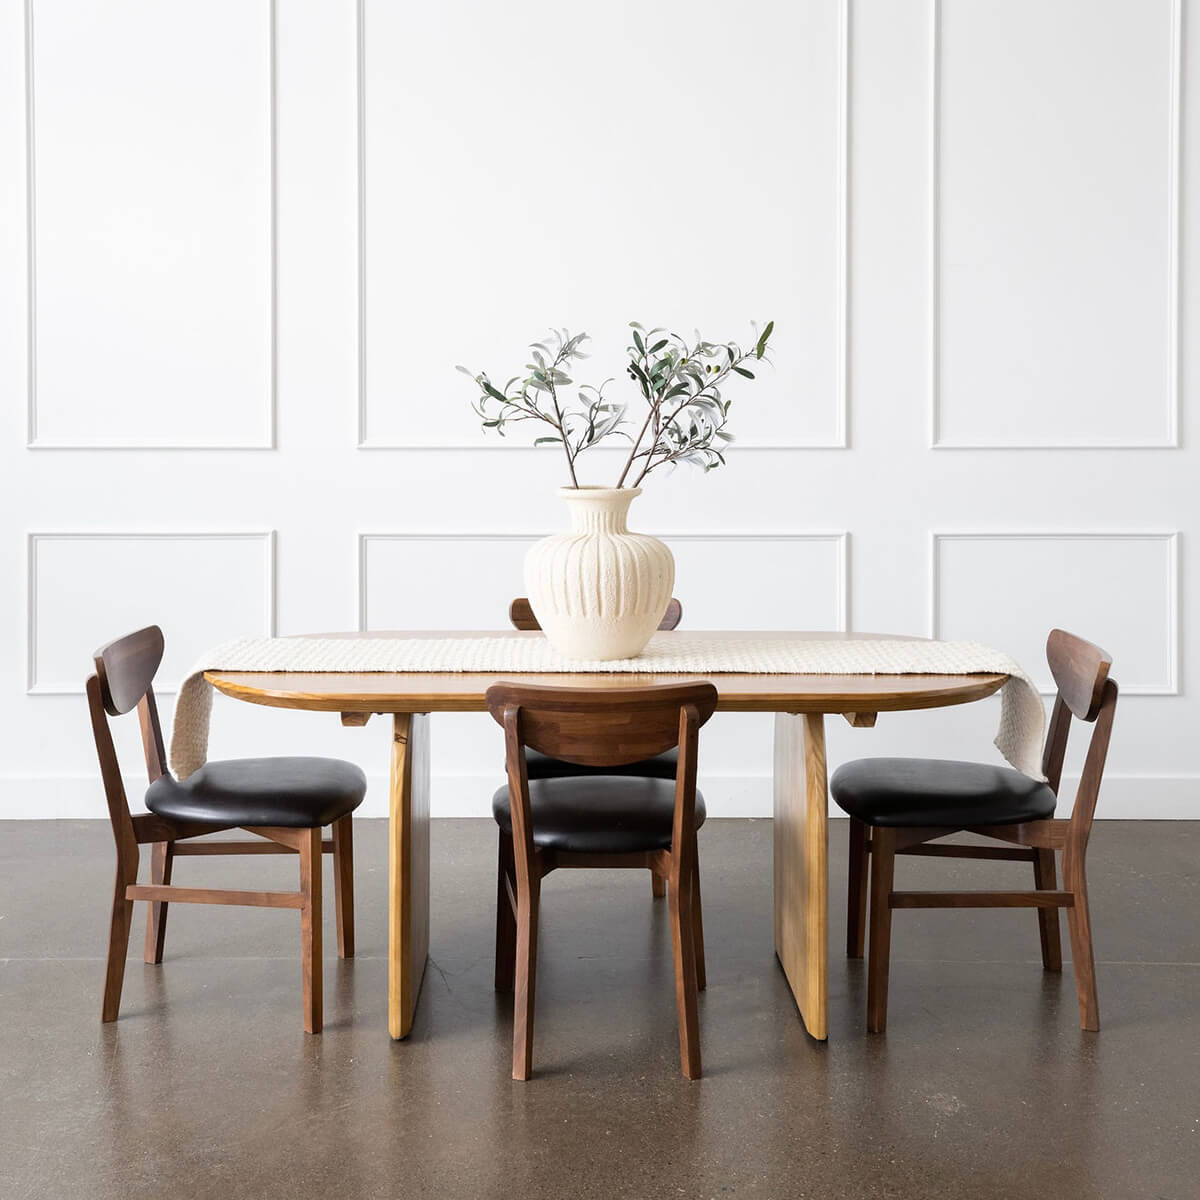 Hedy - New Zealand Pine Dining Table 71"